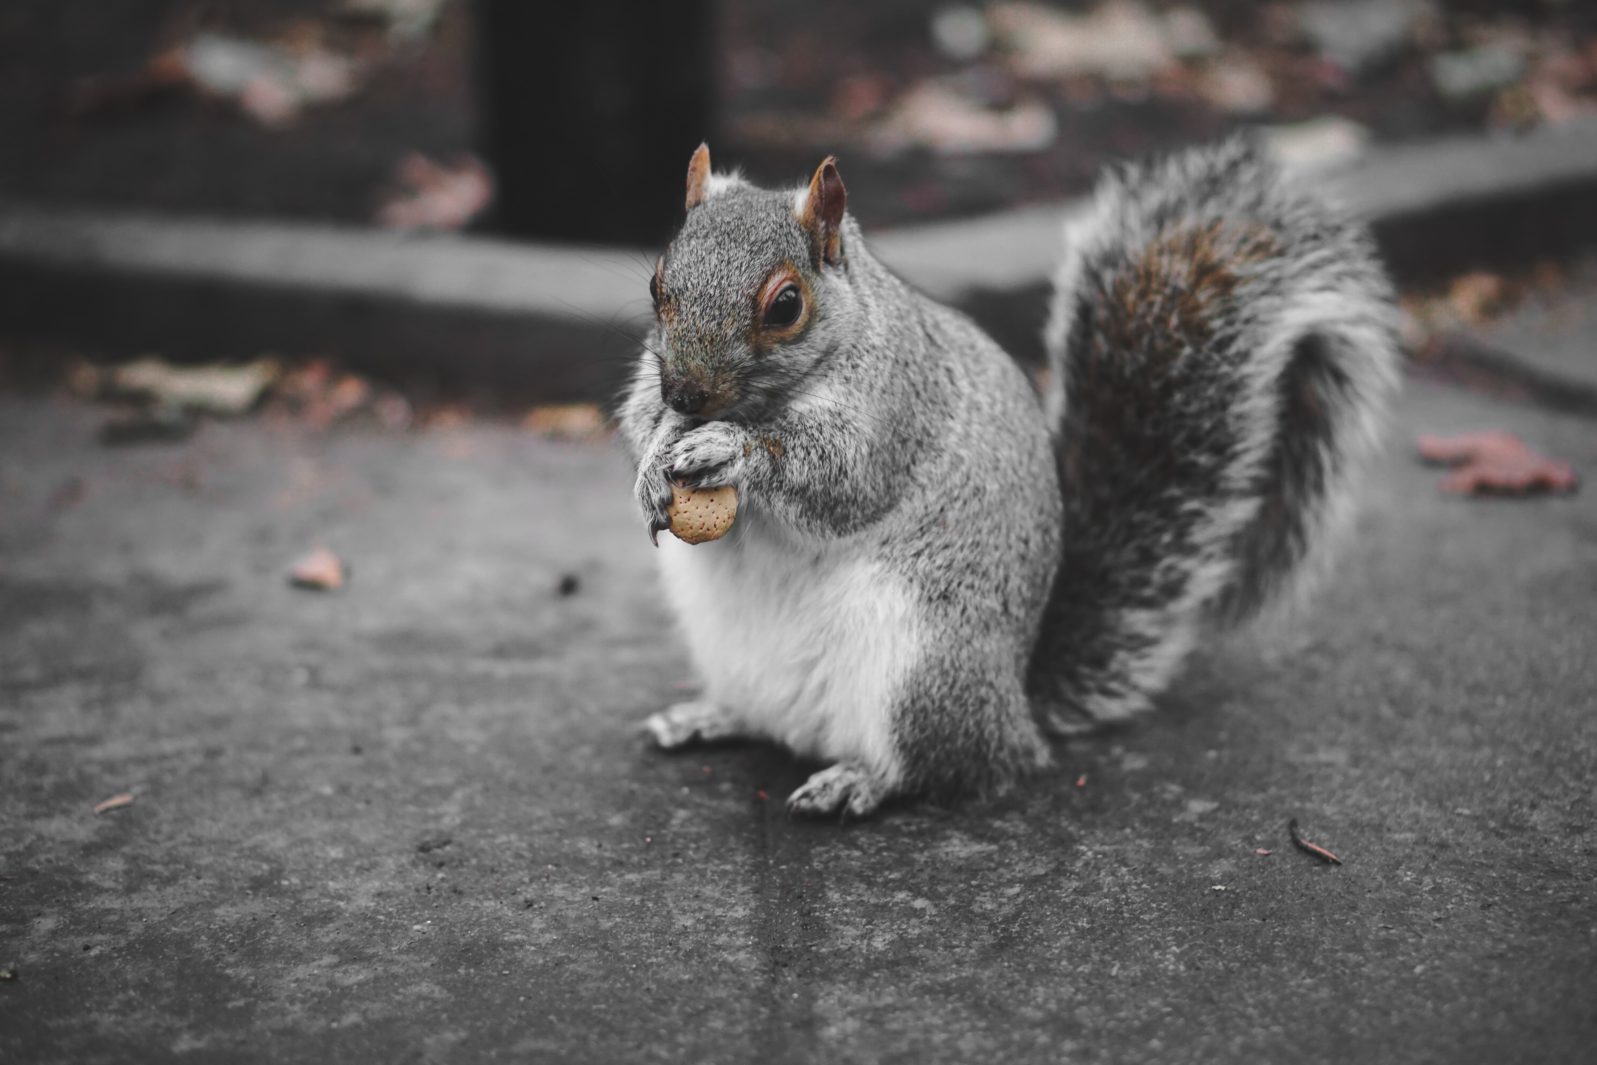 Found this little guy munching away in Washington Square Park, NY